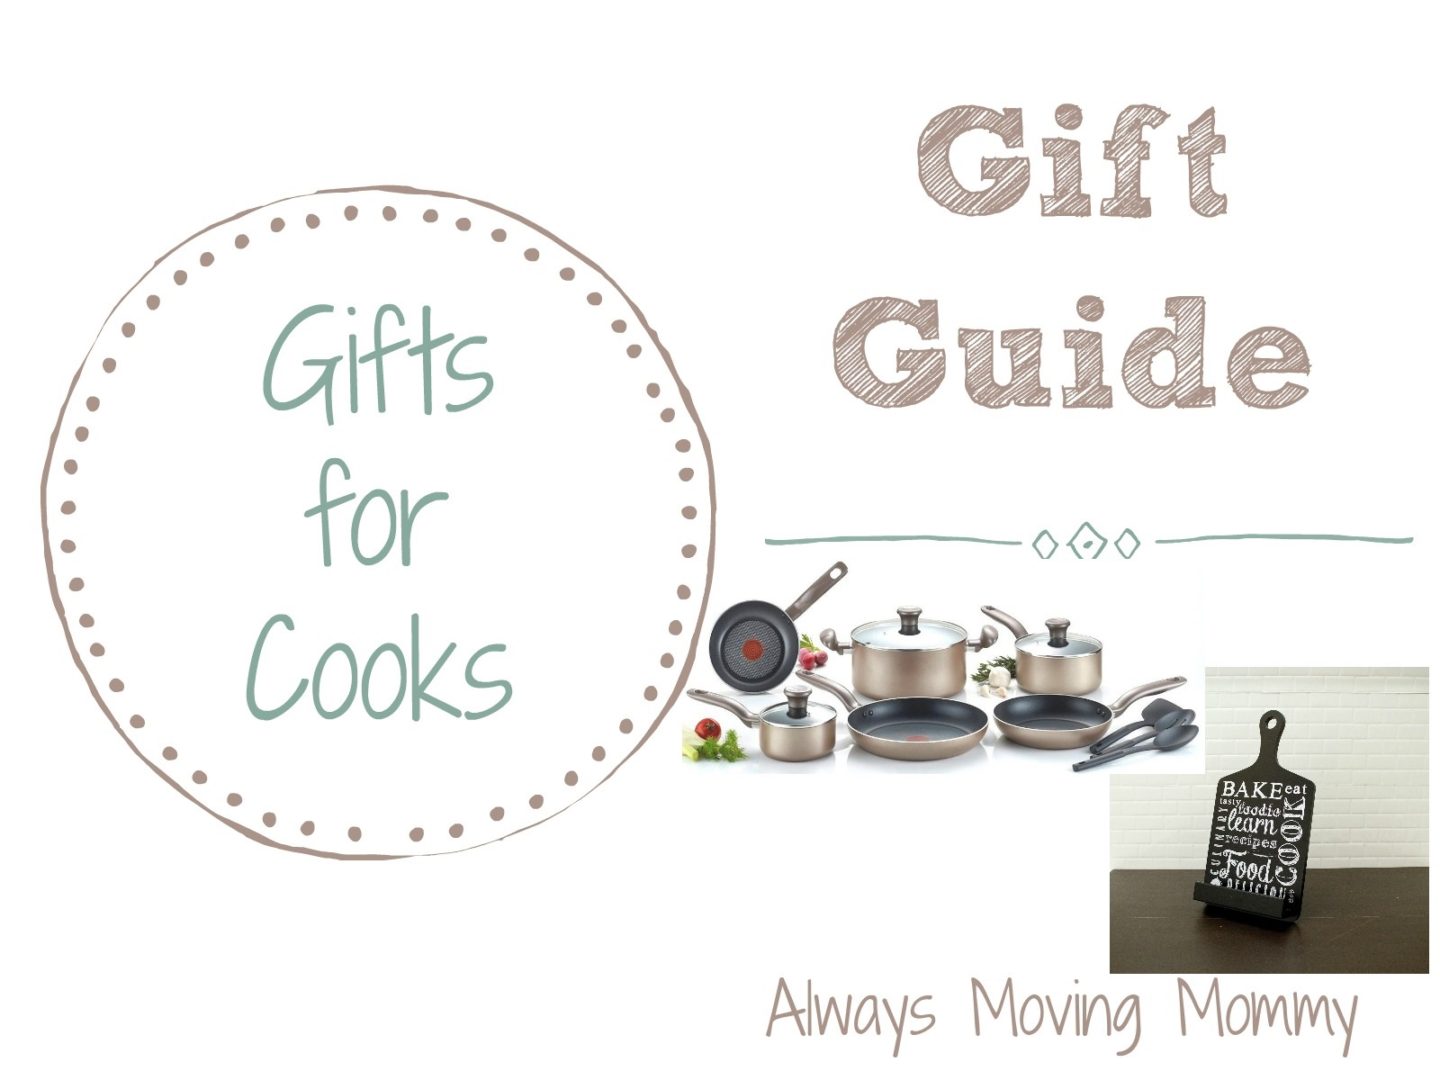 Gift Guide: Gift Ideas for Cooks | Always Moving Mommy | This gift guide has lots of practical gift ideas for that cook in your life